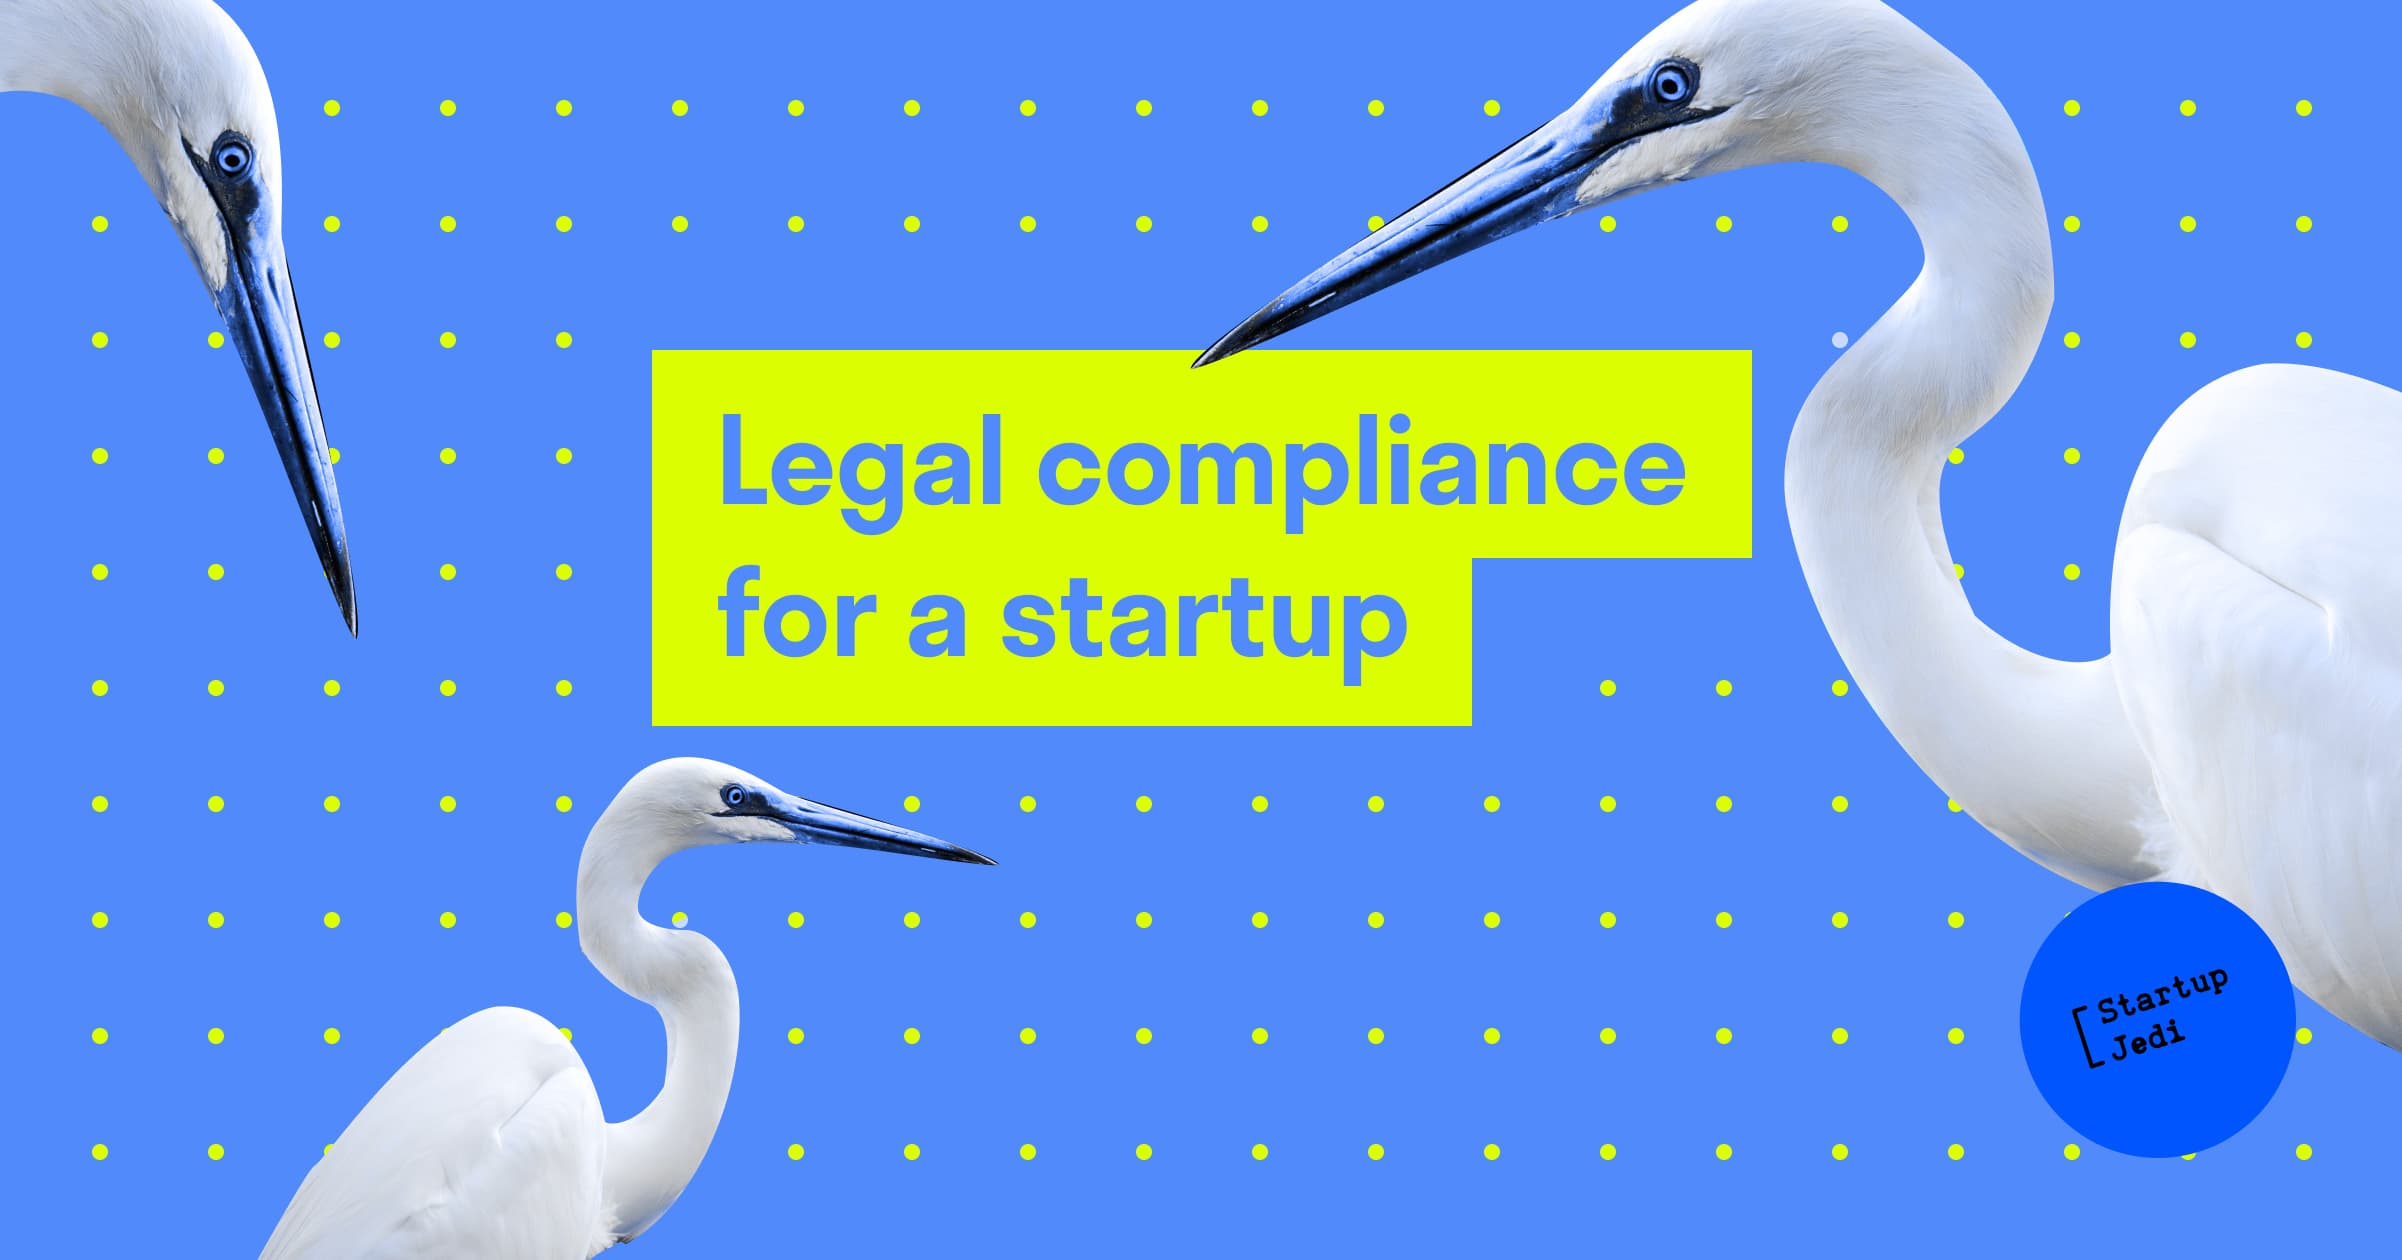 Legal compliance for a startup: what documentation to take care of from day 1 to avoid problems in future